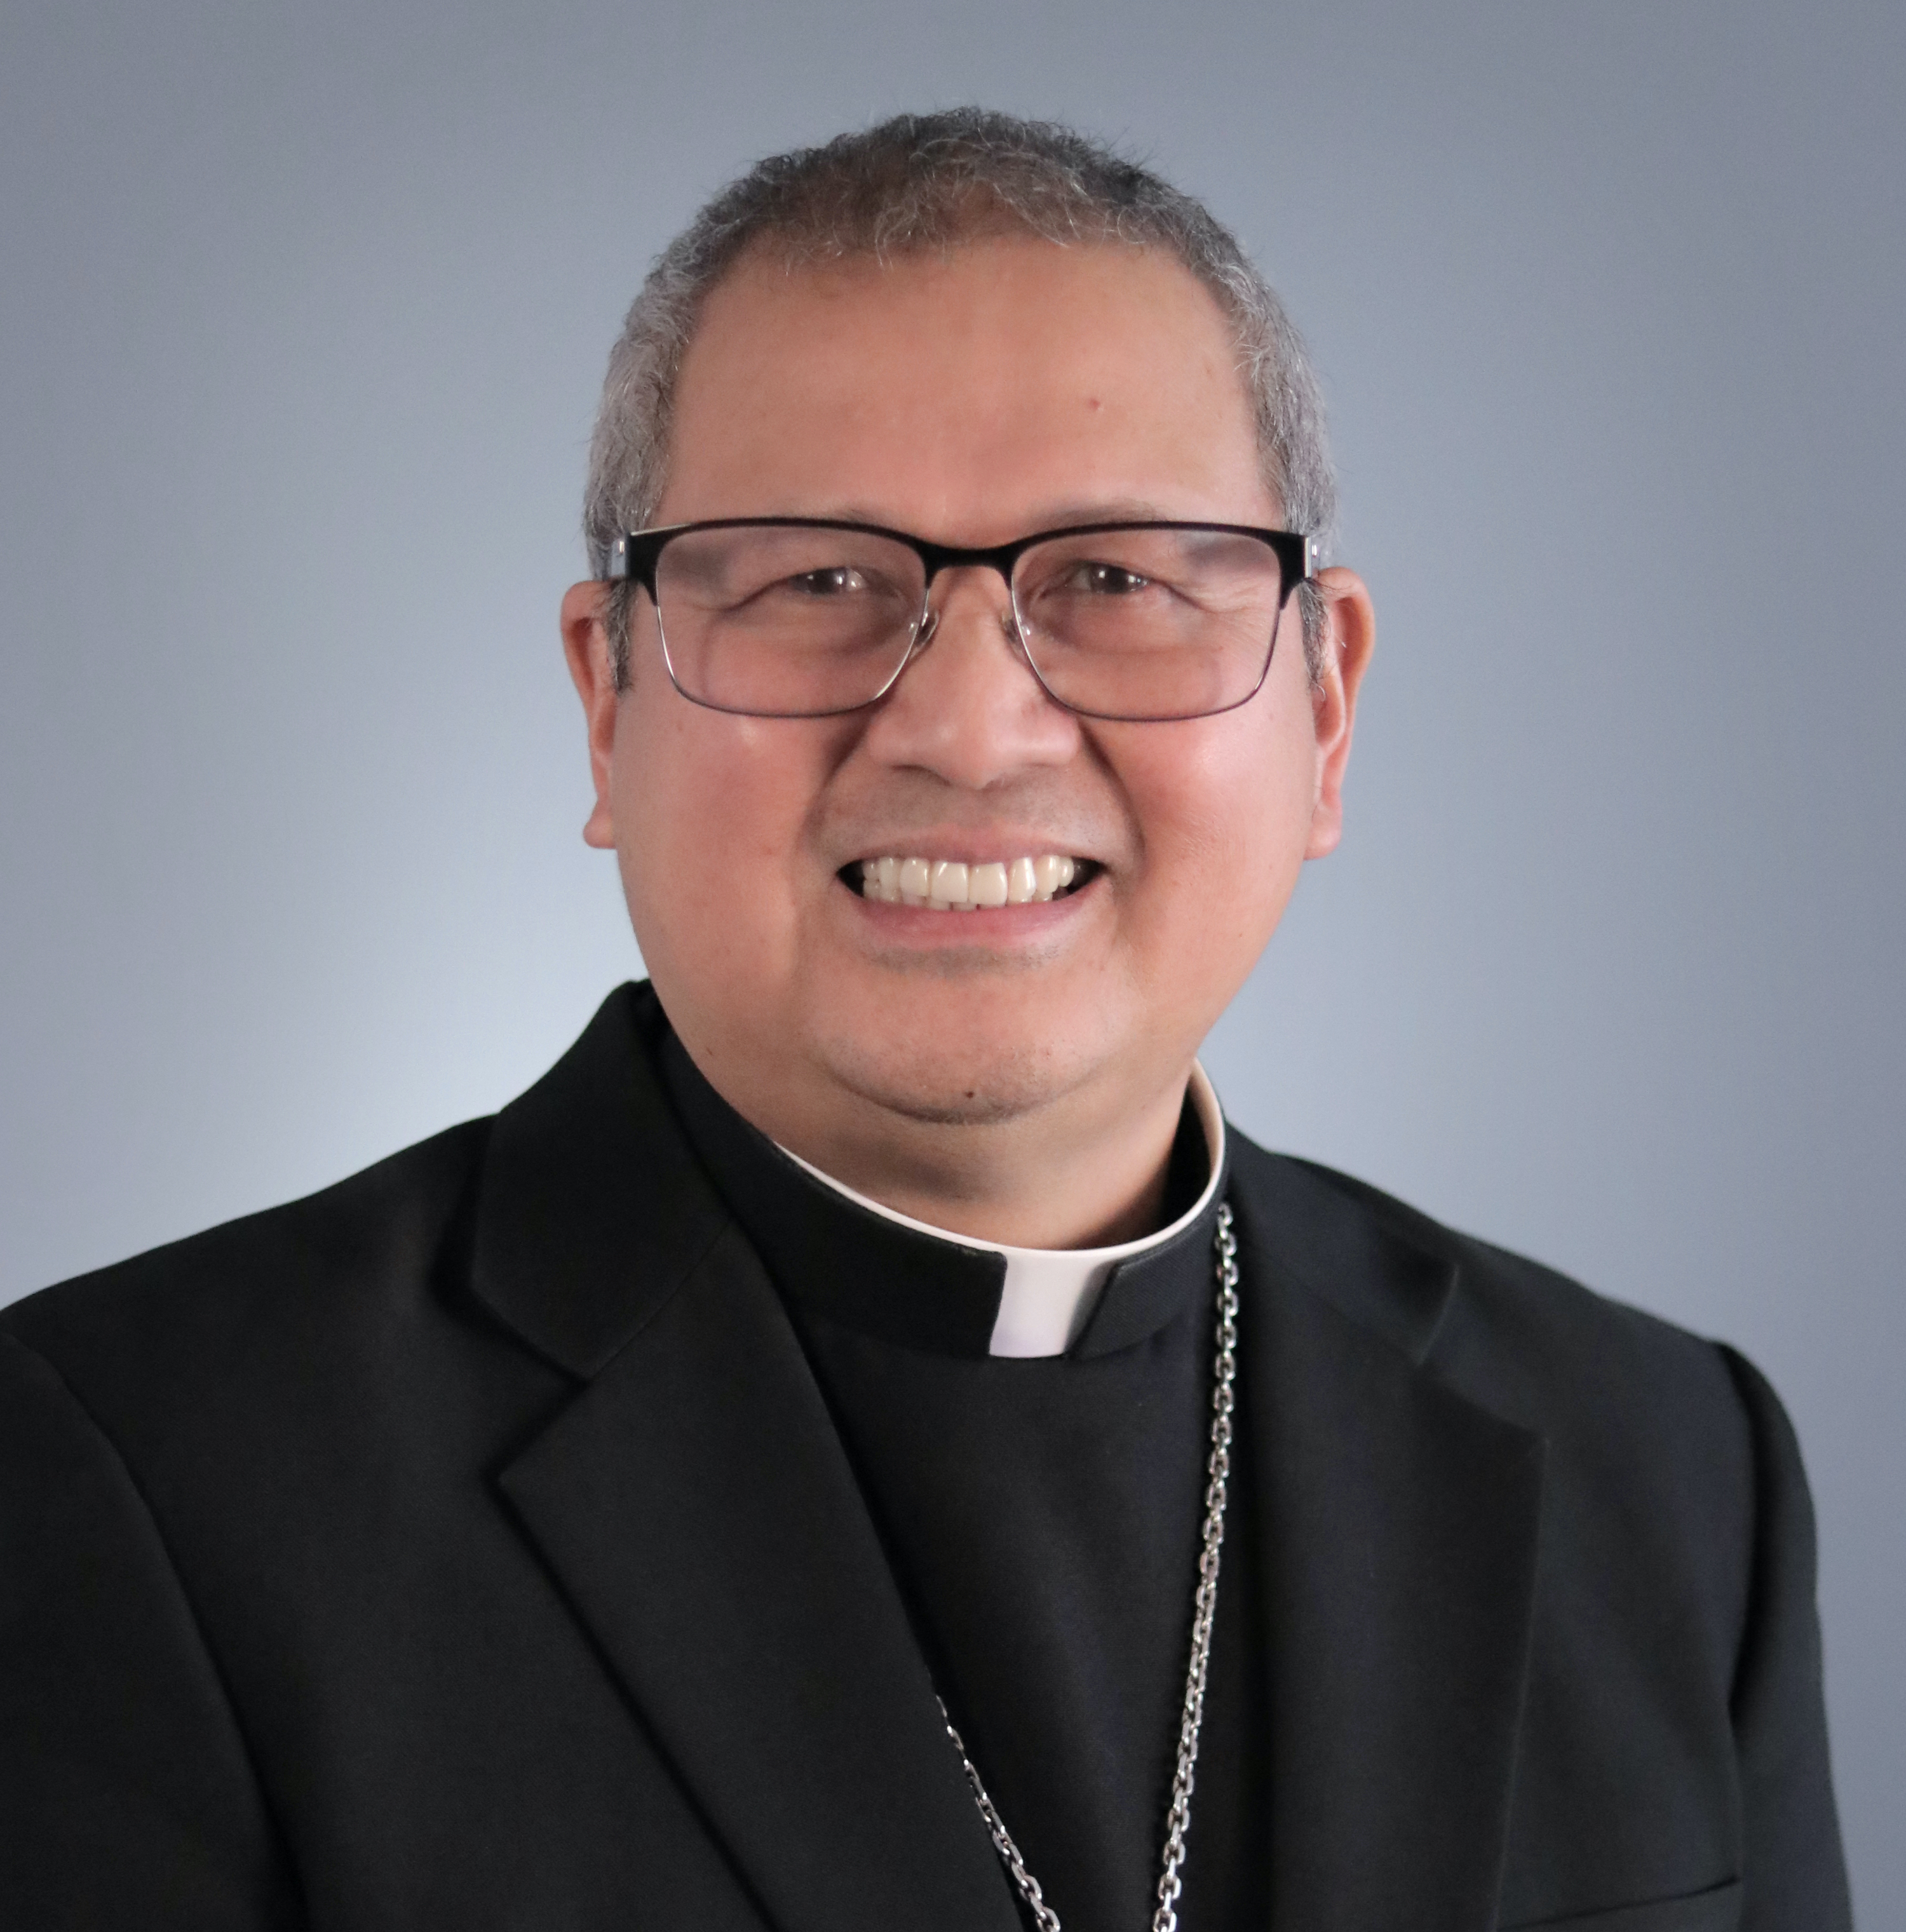 Meet Efren Esmilla, the first bishop of Filipino descent in the Archdiocese of Philadelphia